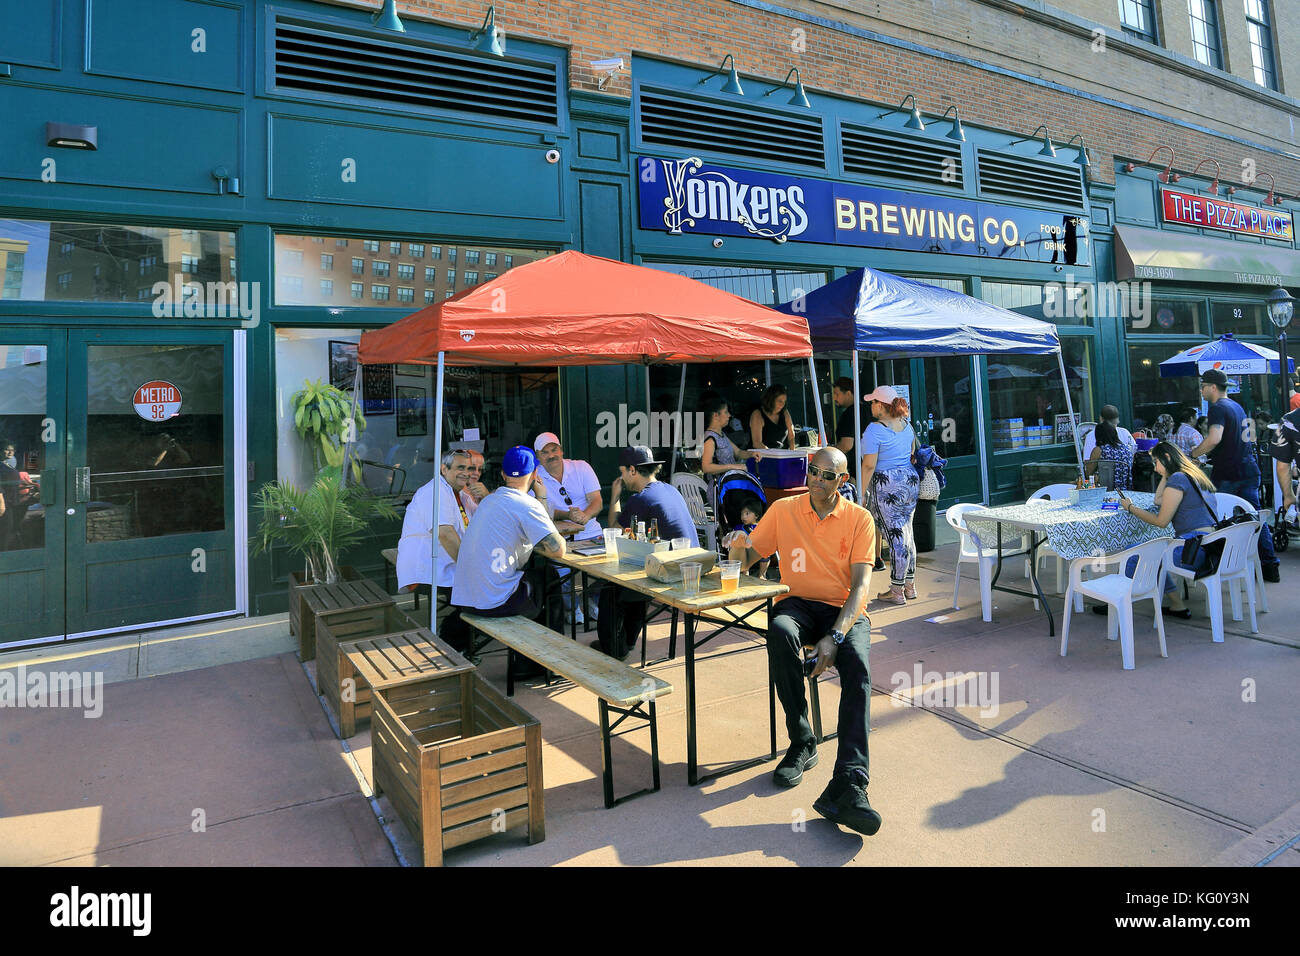 Yonkers Brewing Company micro brewery downtown Yonkers New York Stock Photo